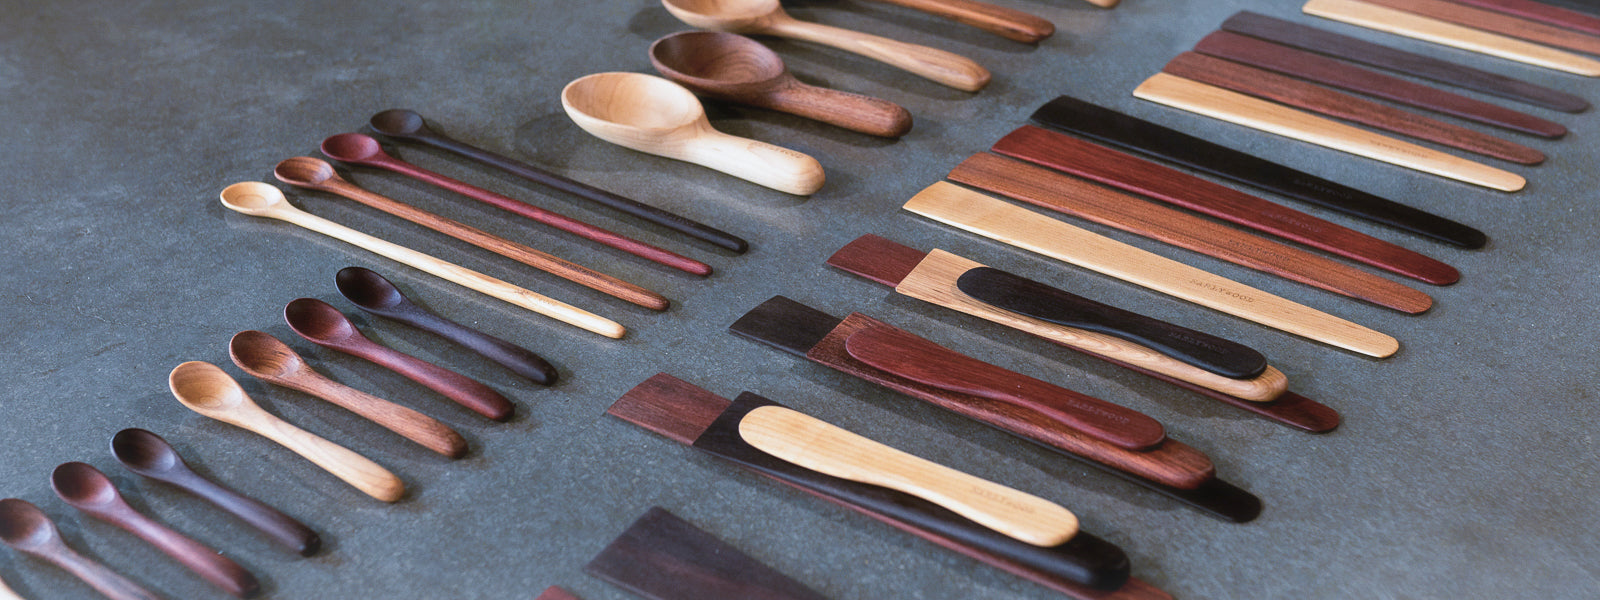 Wooden Cooking Spoon Set - Earlywood